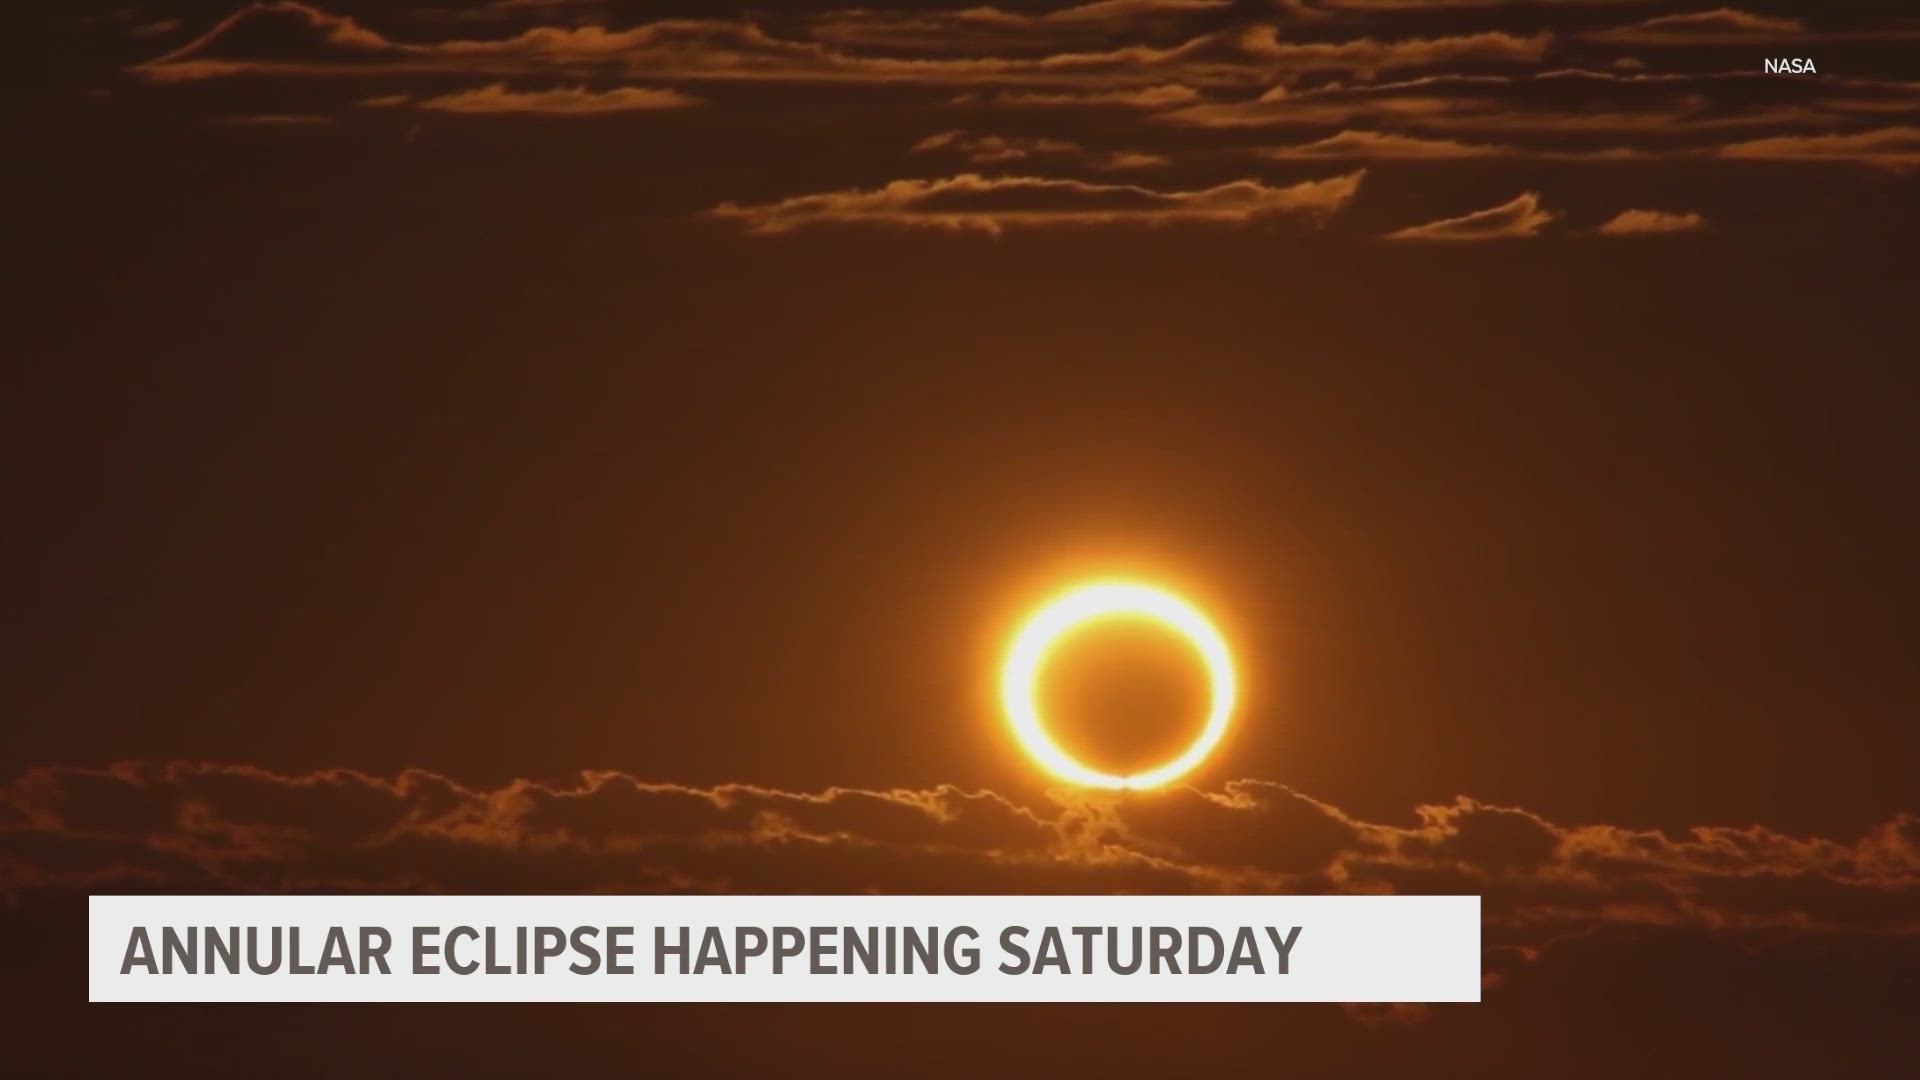 Iowa will only see a partial solar eclipse on Saturday, but it will be the last opportunity to see one of this kind for more than ten years.